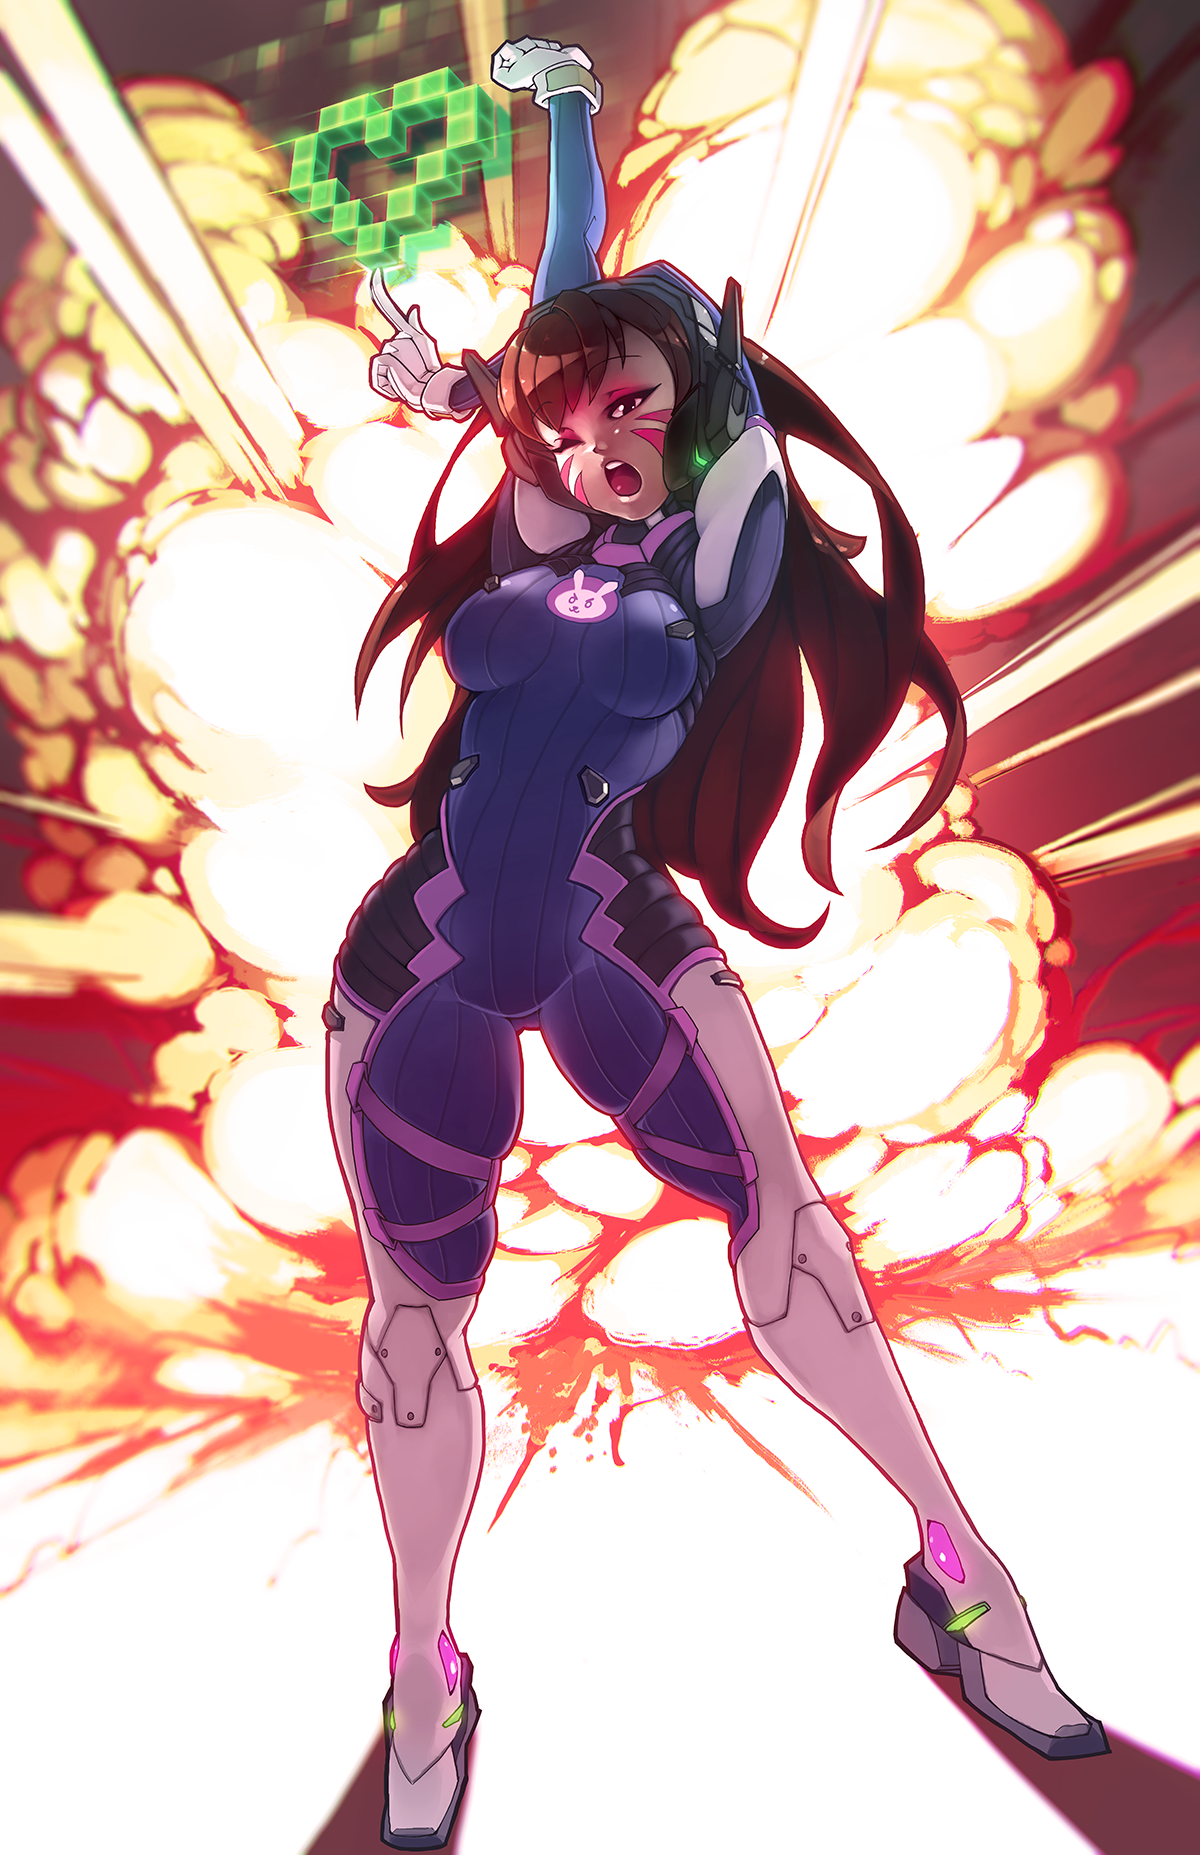 Explosions are boring! [迪瓦]